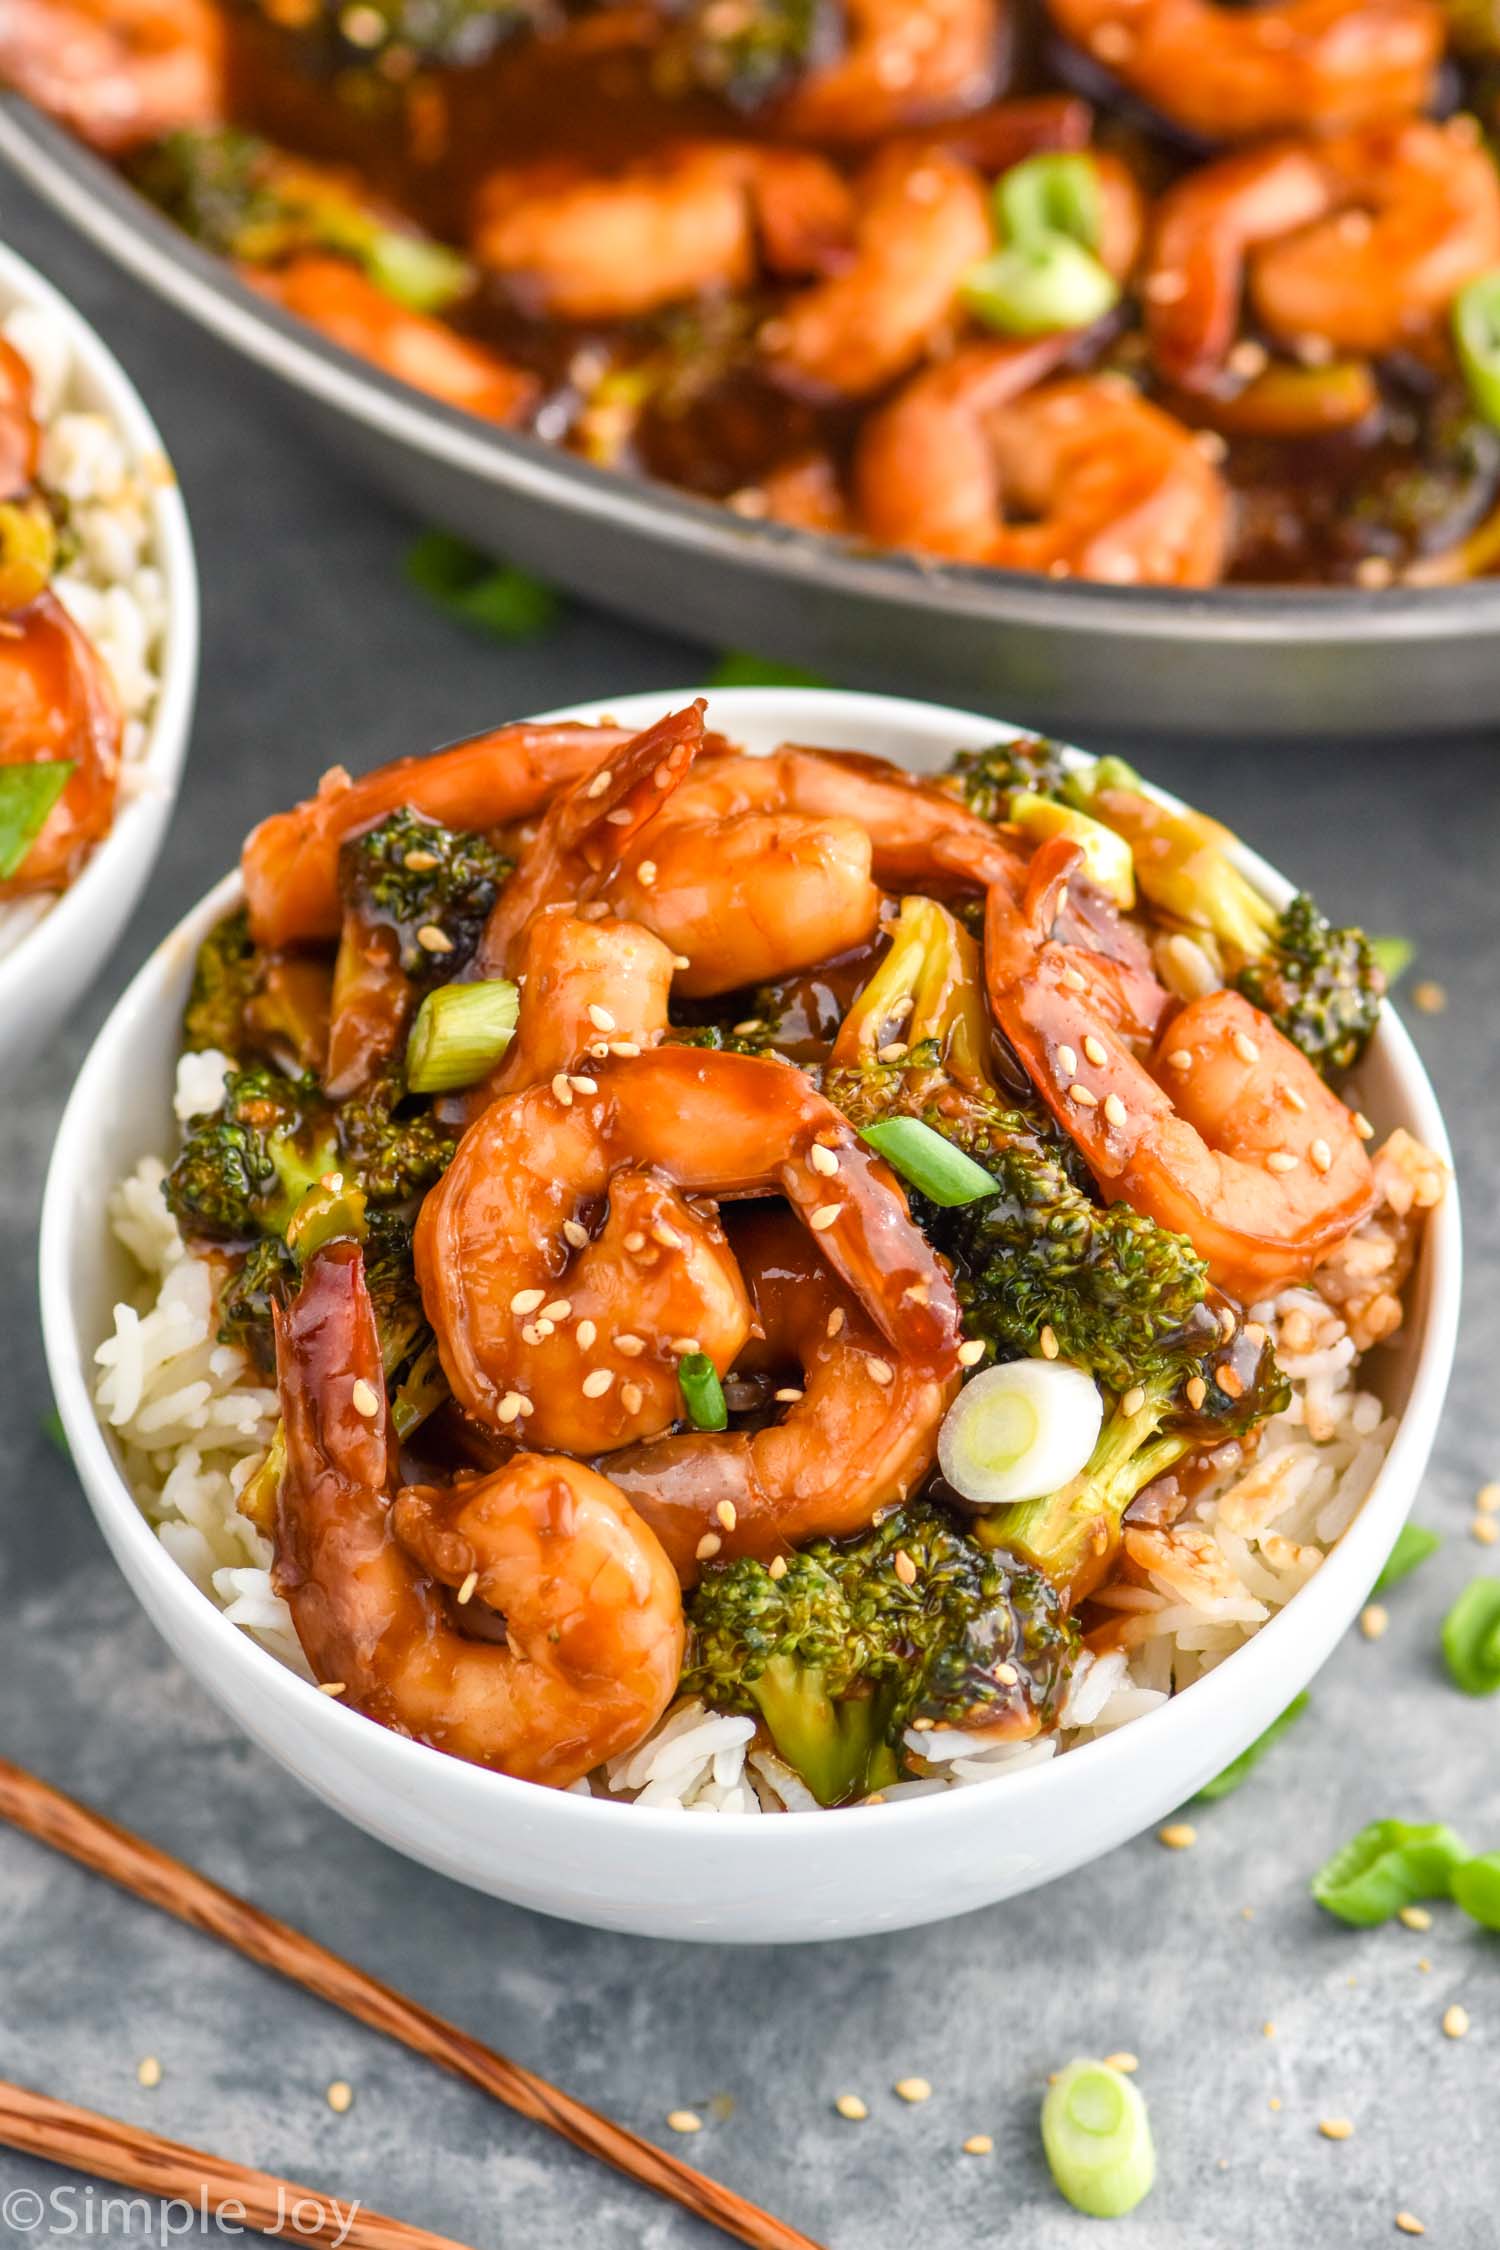 Overhead photo of shrimp and broccoli stir fry in a white bowl served over rice.